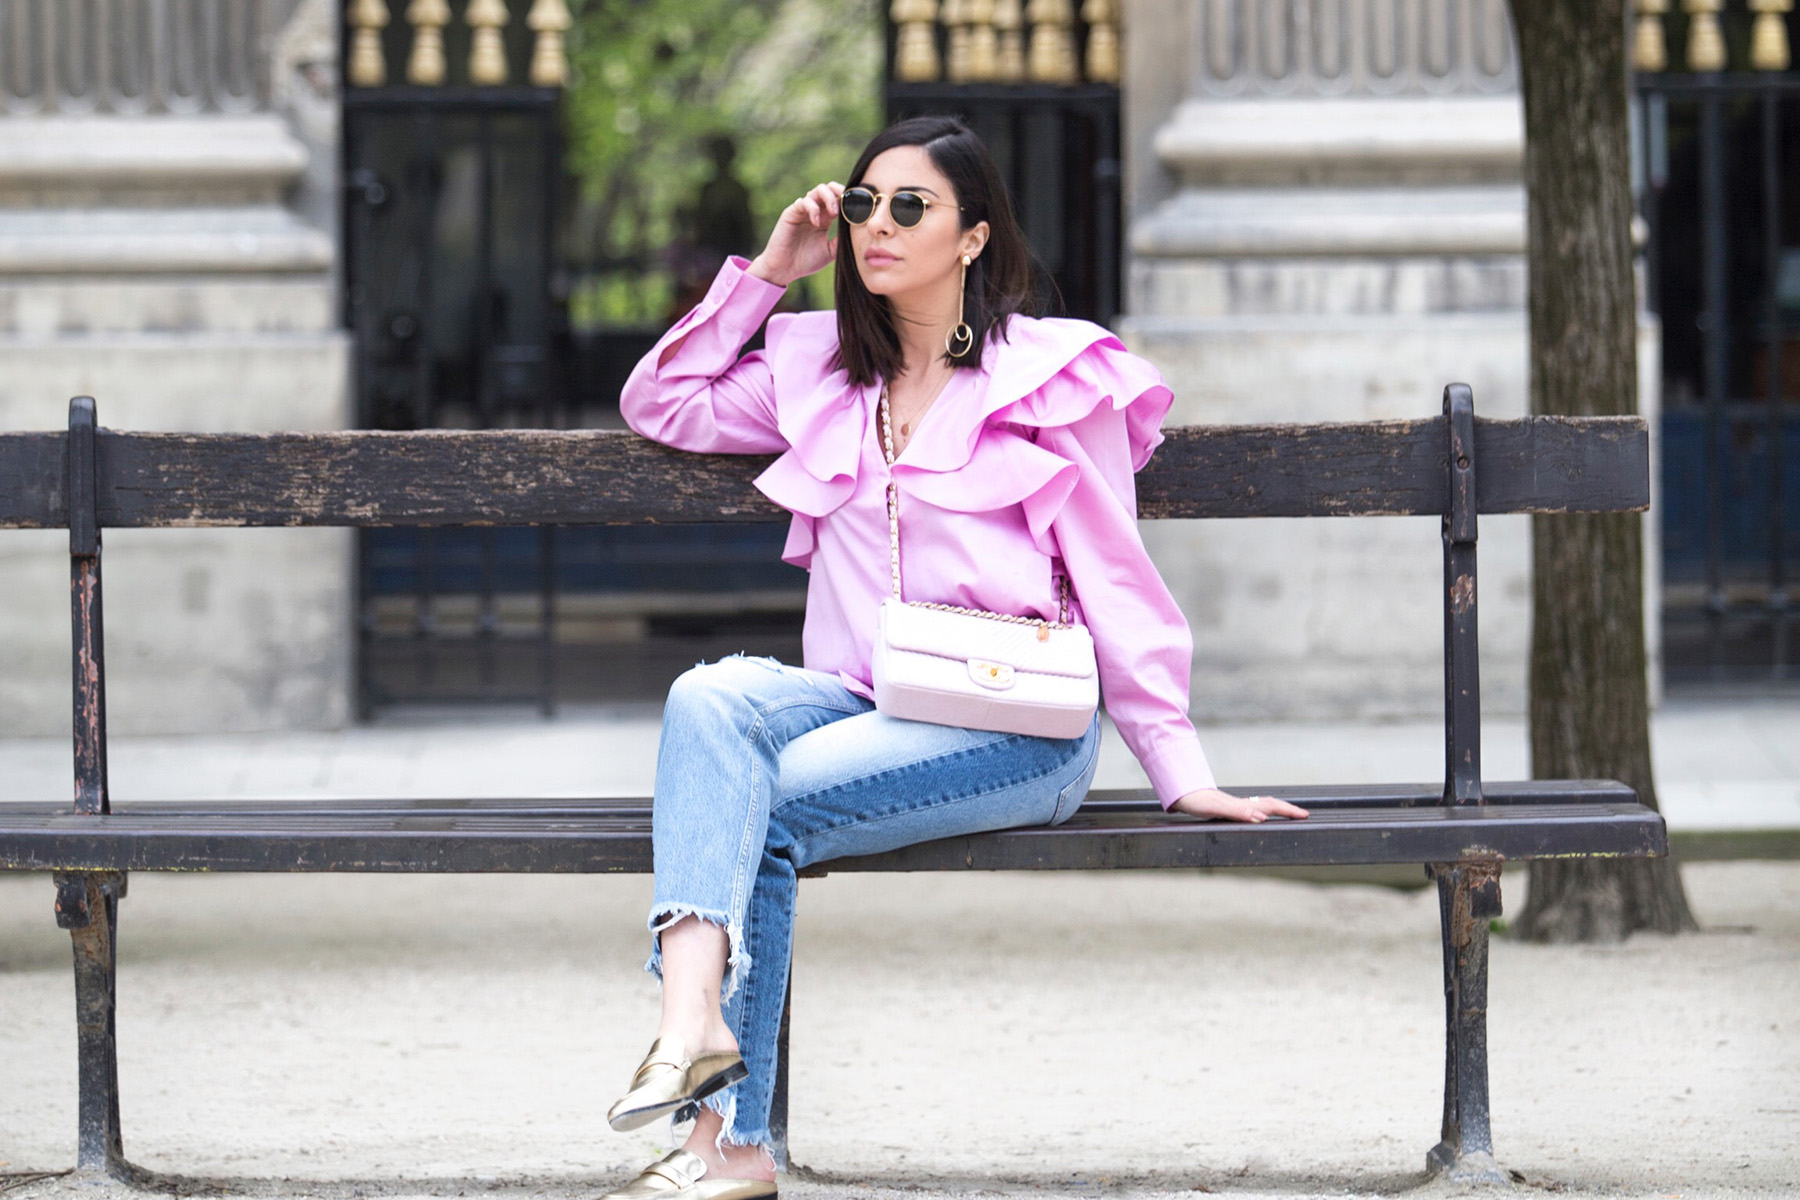 Stella Asteria Fashion & Lifestyle Blogger wearing pink ruffle blouse, jeans and pink Chanel bag